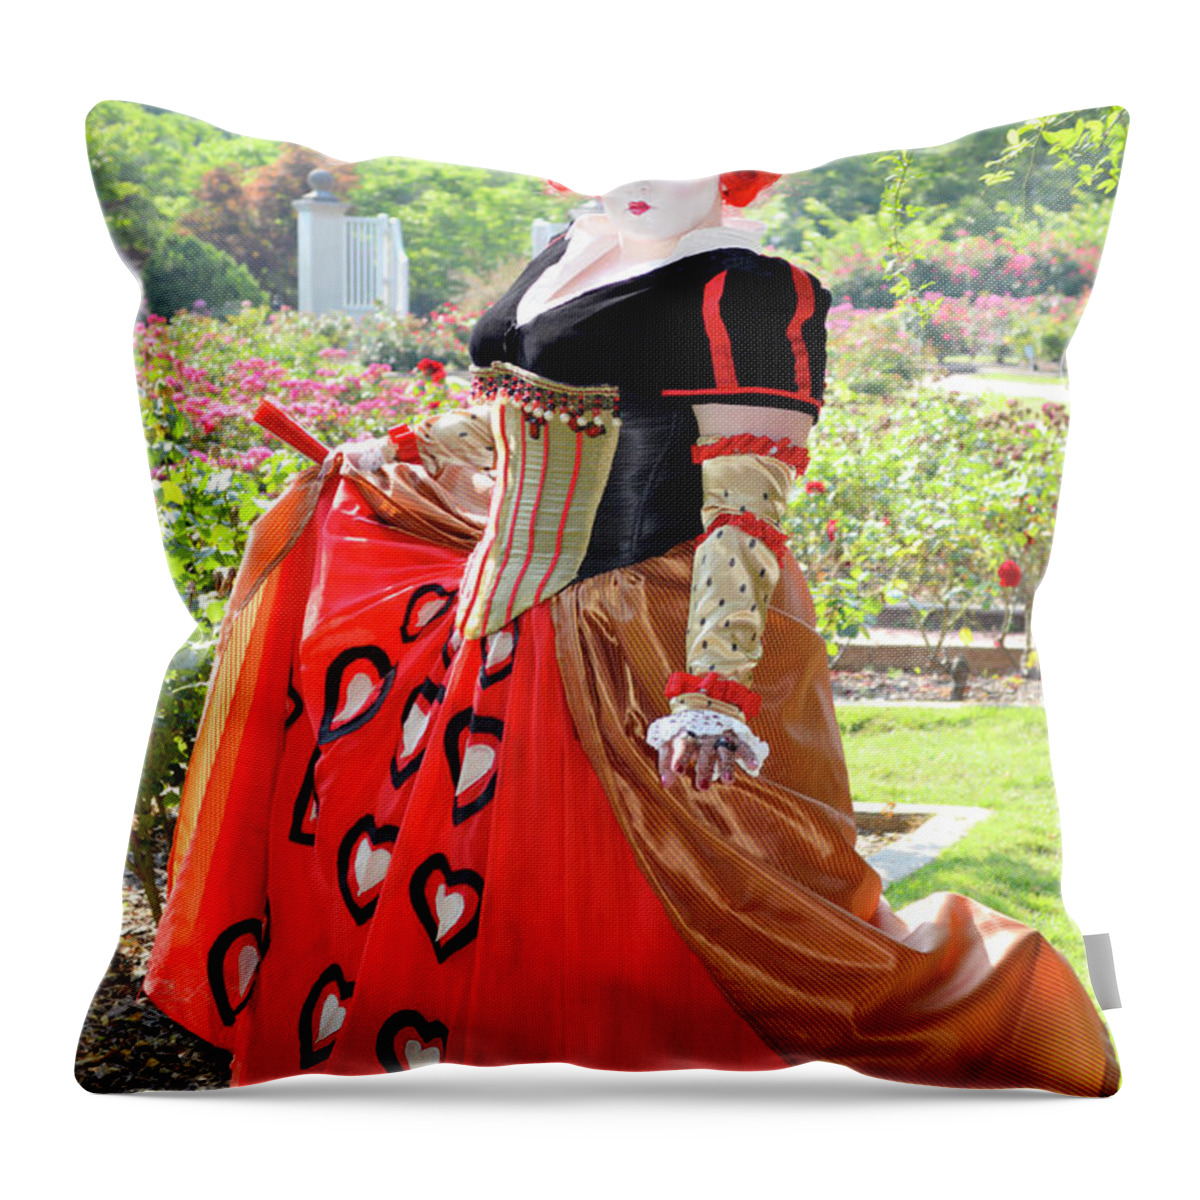 Alice Throw Pillow featuring the photograph Footloose by Jason Bohannon